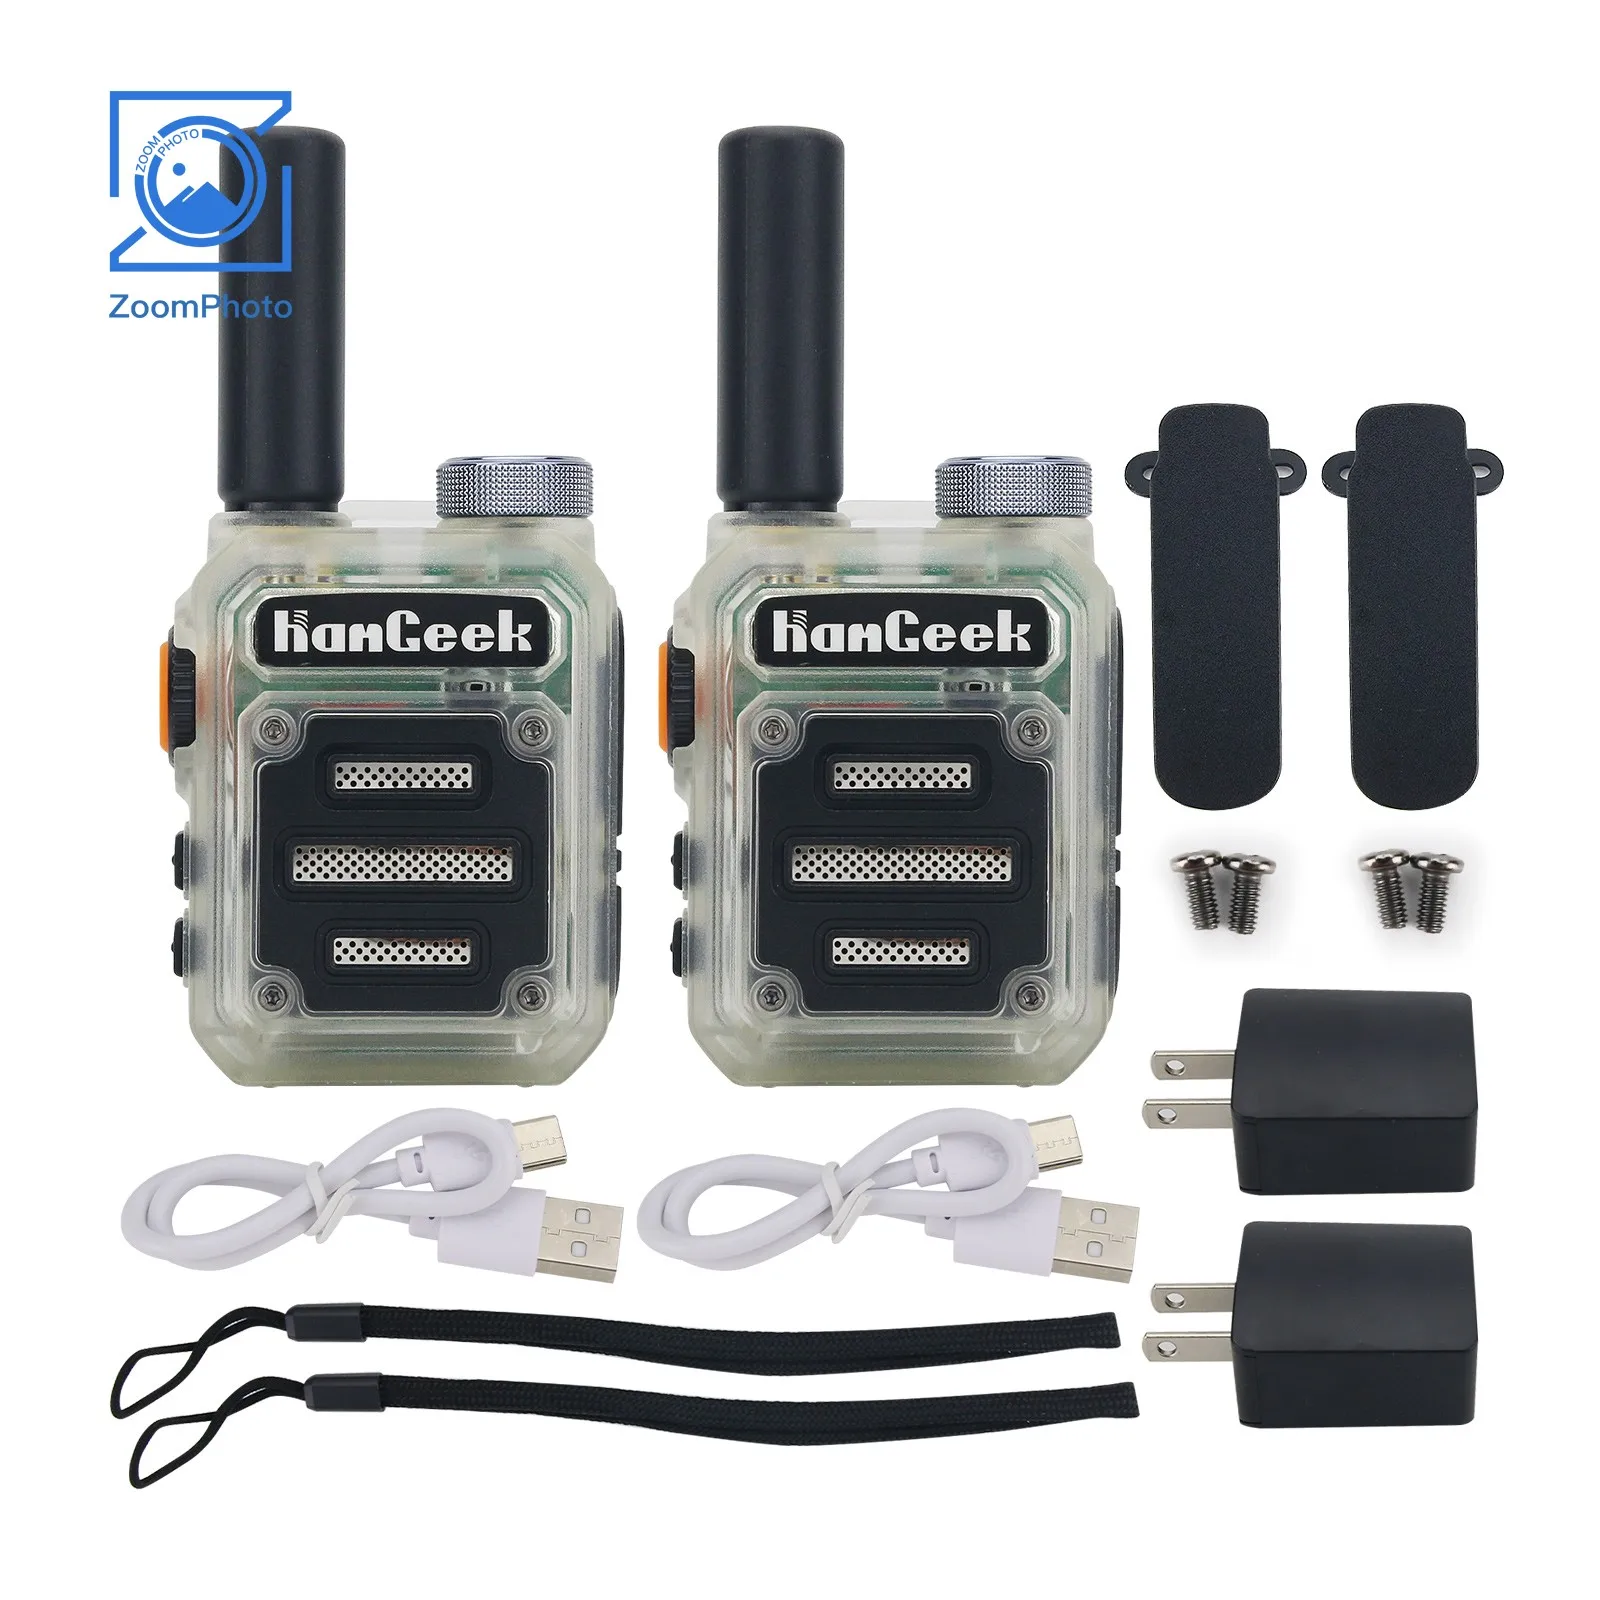 hamgeek-automatic-frequency-alignment-walkie-talkie-8w-high-power-6000mah-built-in-battery-g63